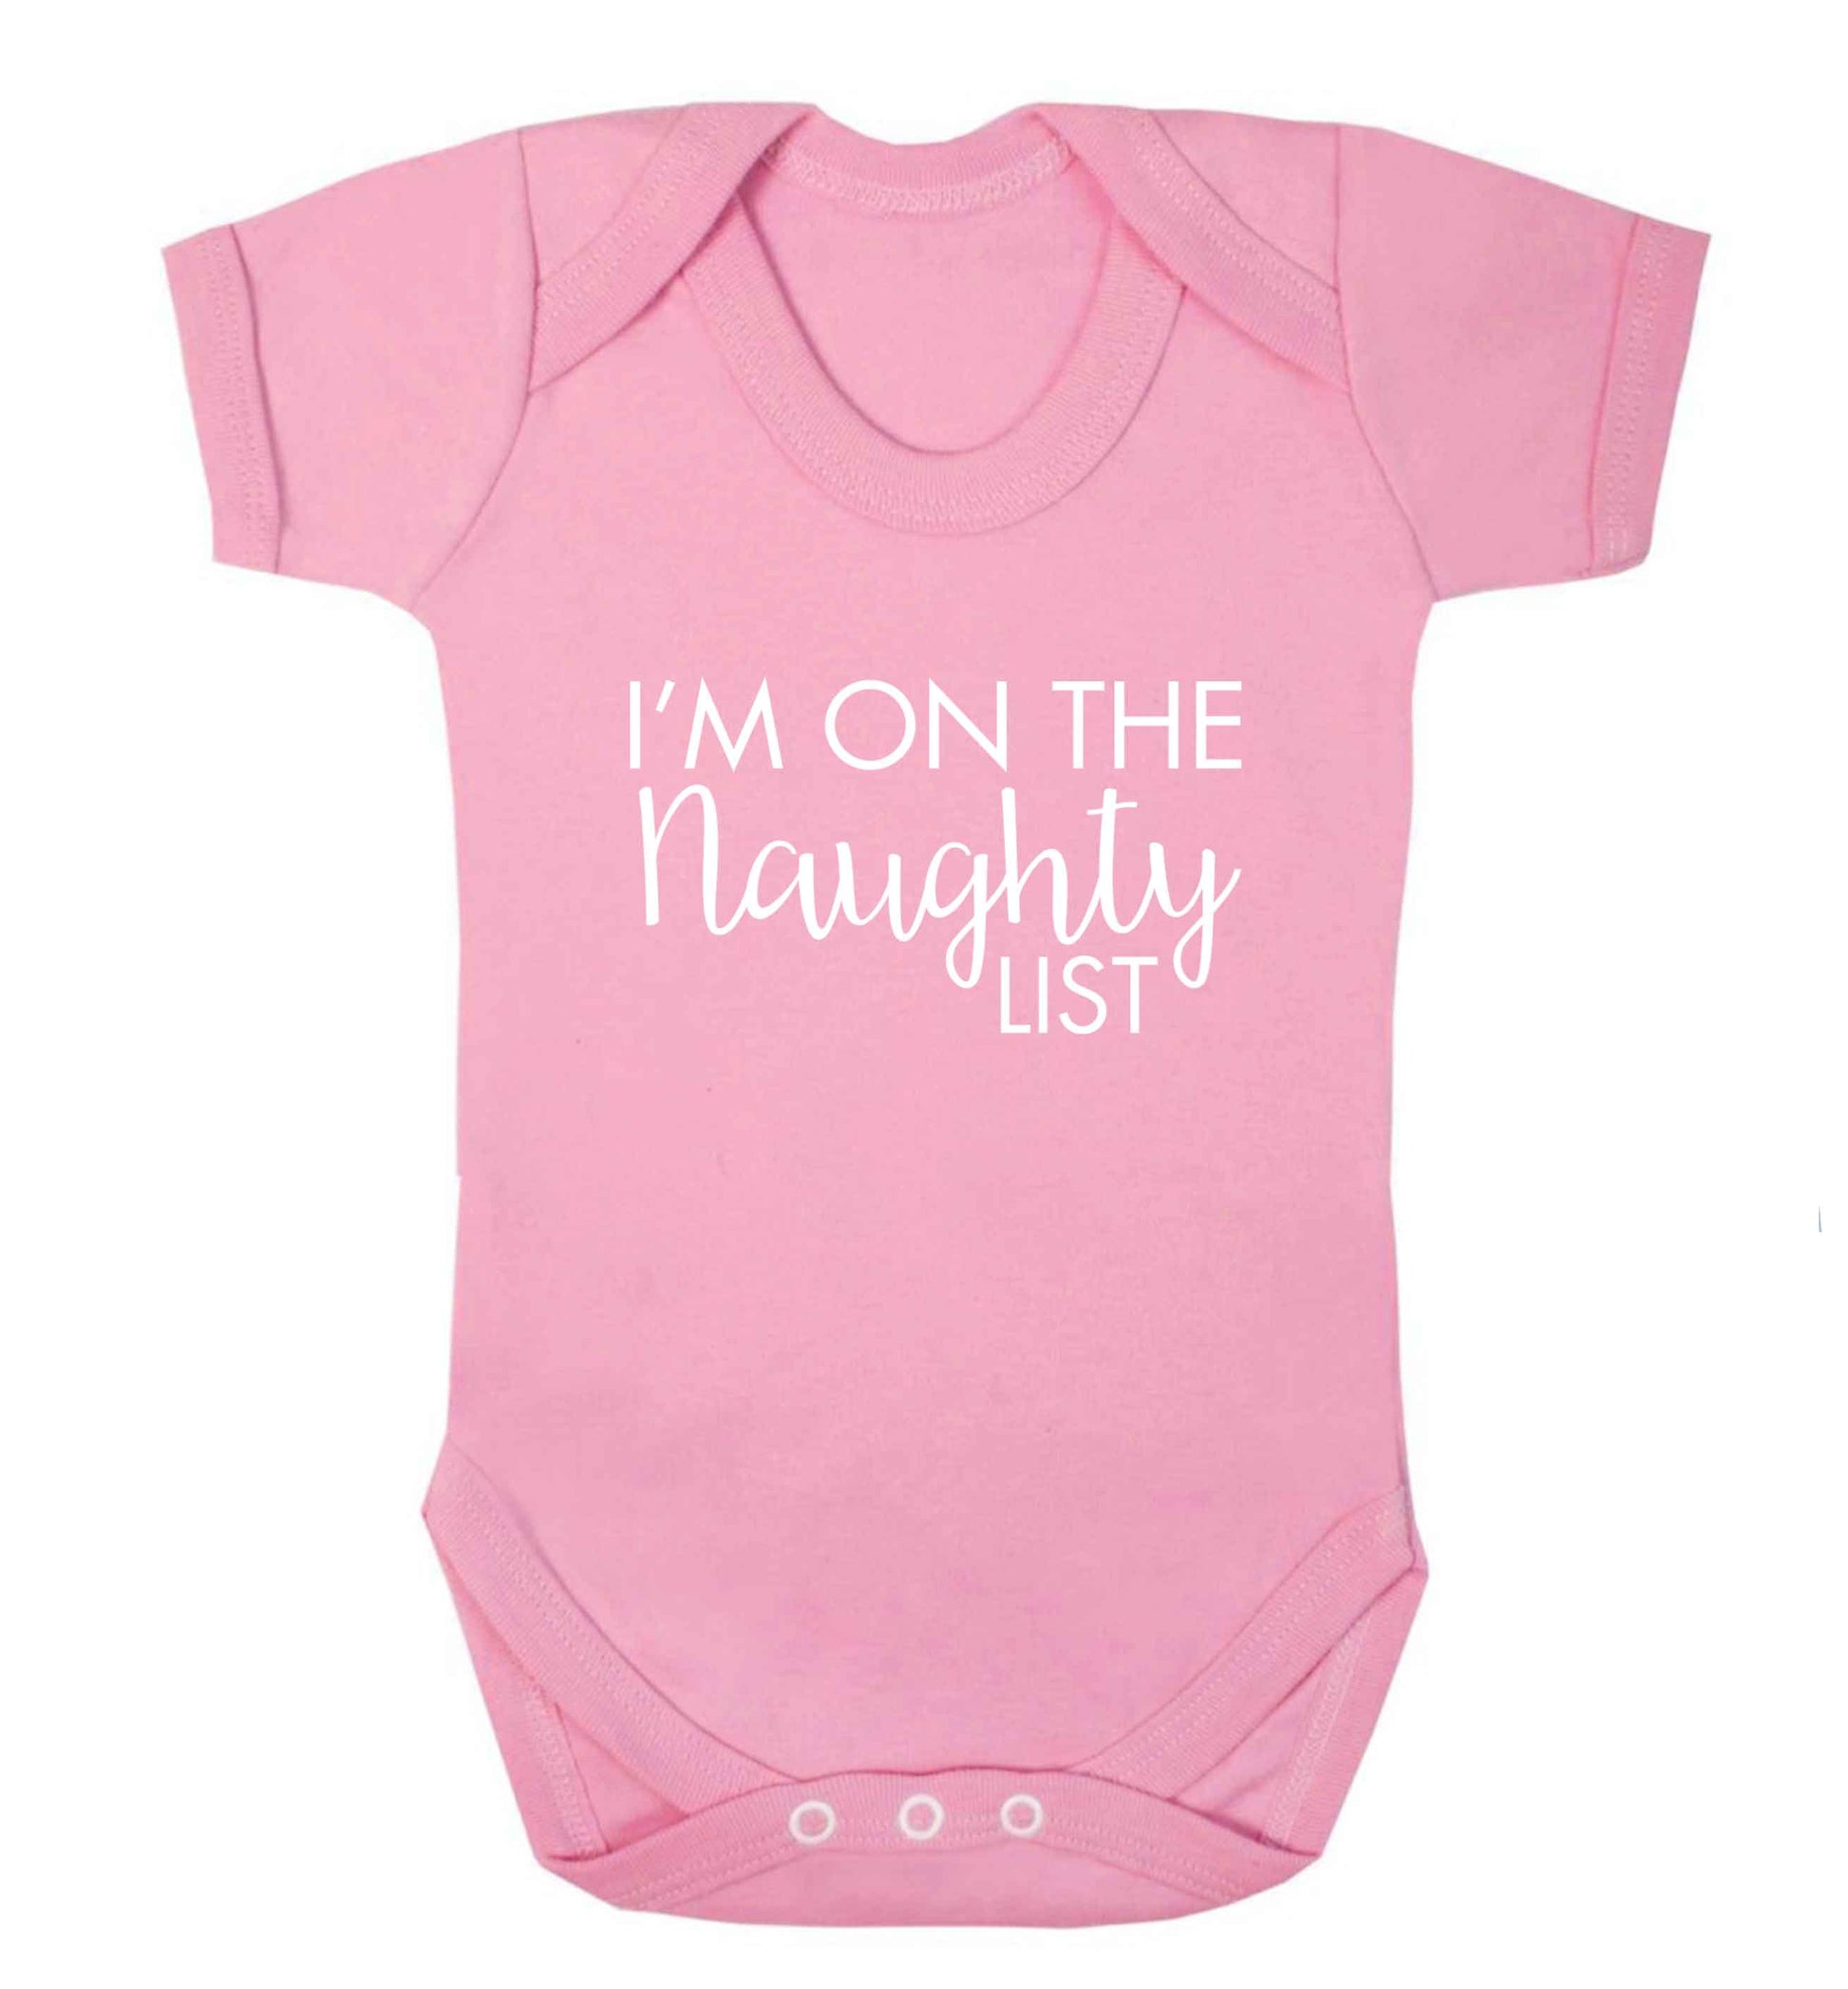 I'm on the naughty list baby vest pale pink 18-24 months